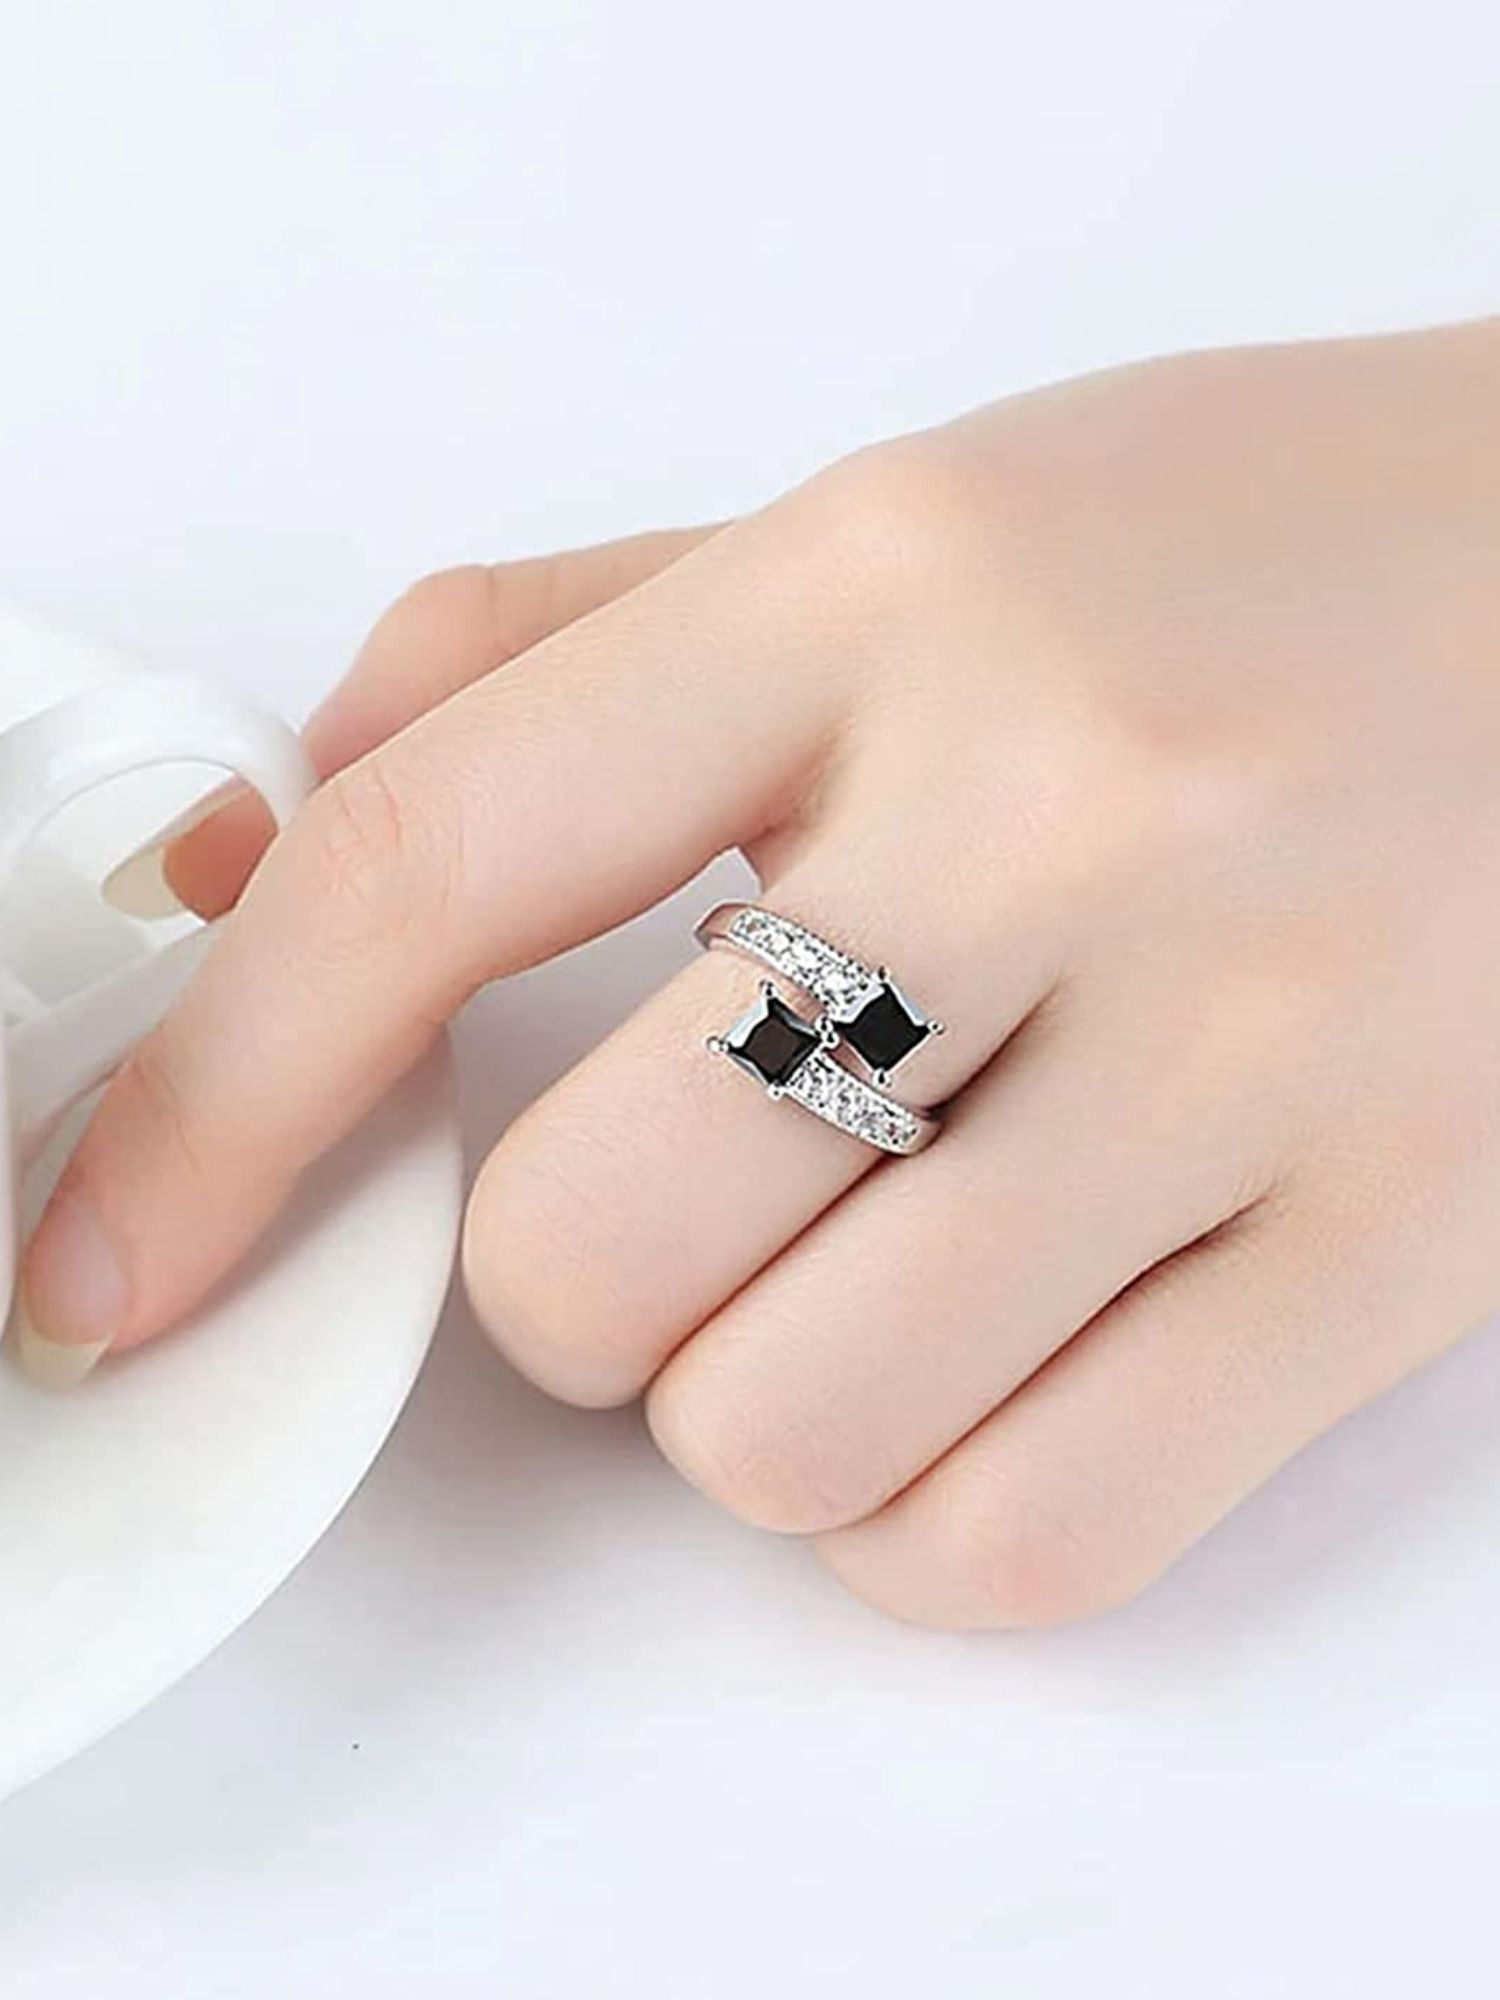 Popular Mixed Styles Black Square Resin Crystal Ring Men's Finger Ring With  Animal Double Eagle Head Geometric Pattern Jewelry - Rings - AliExpress